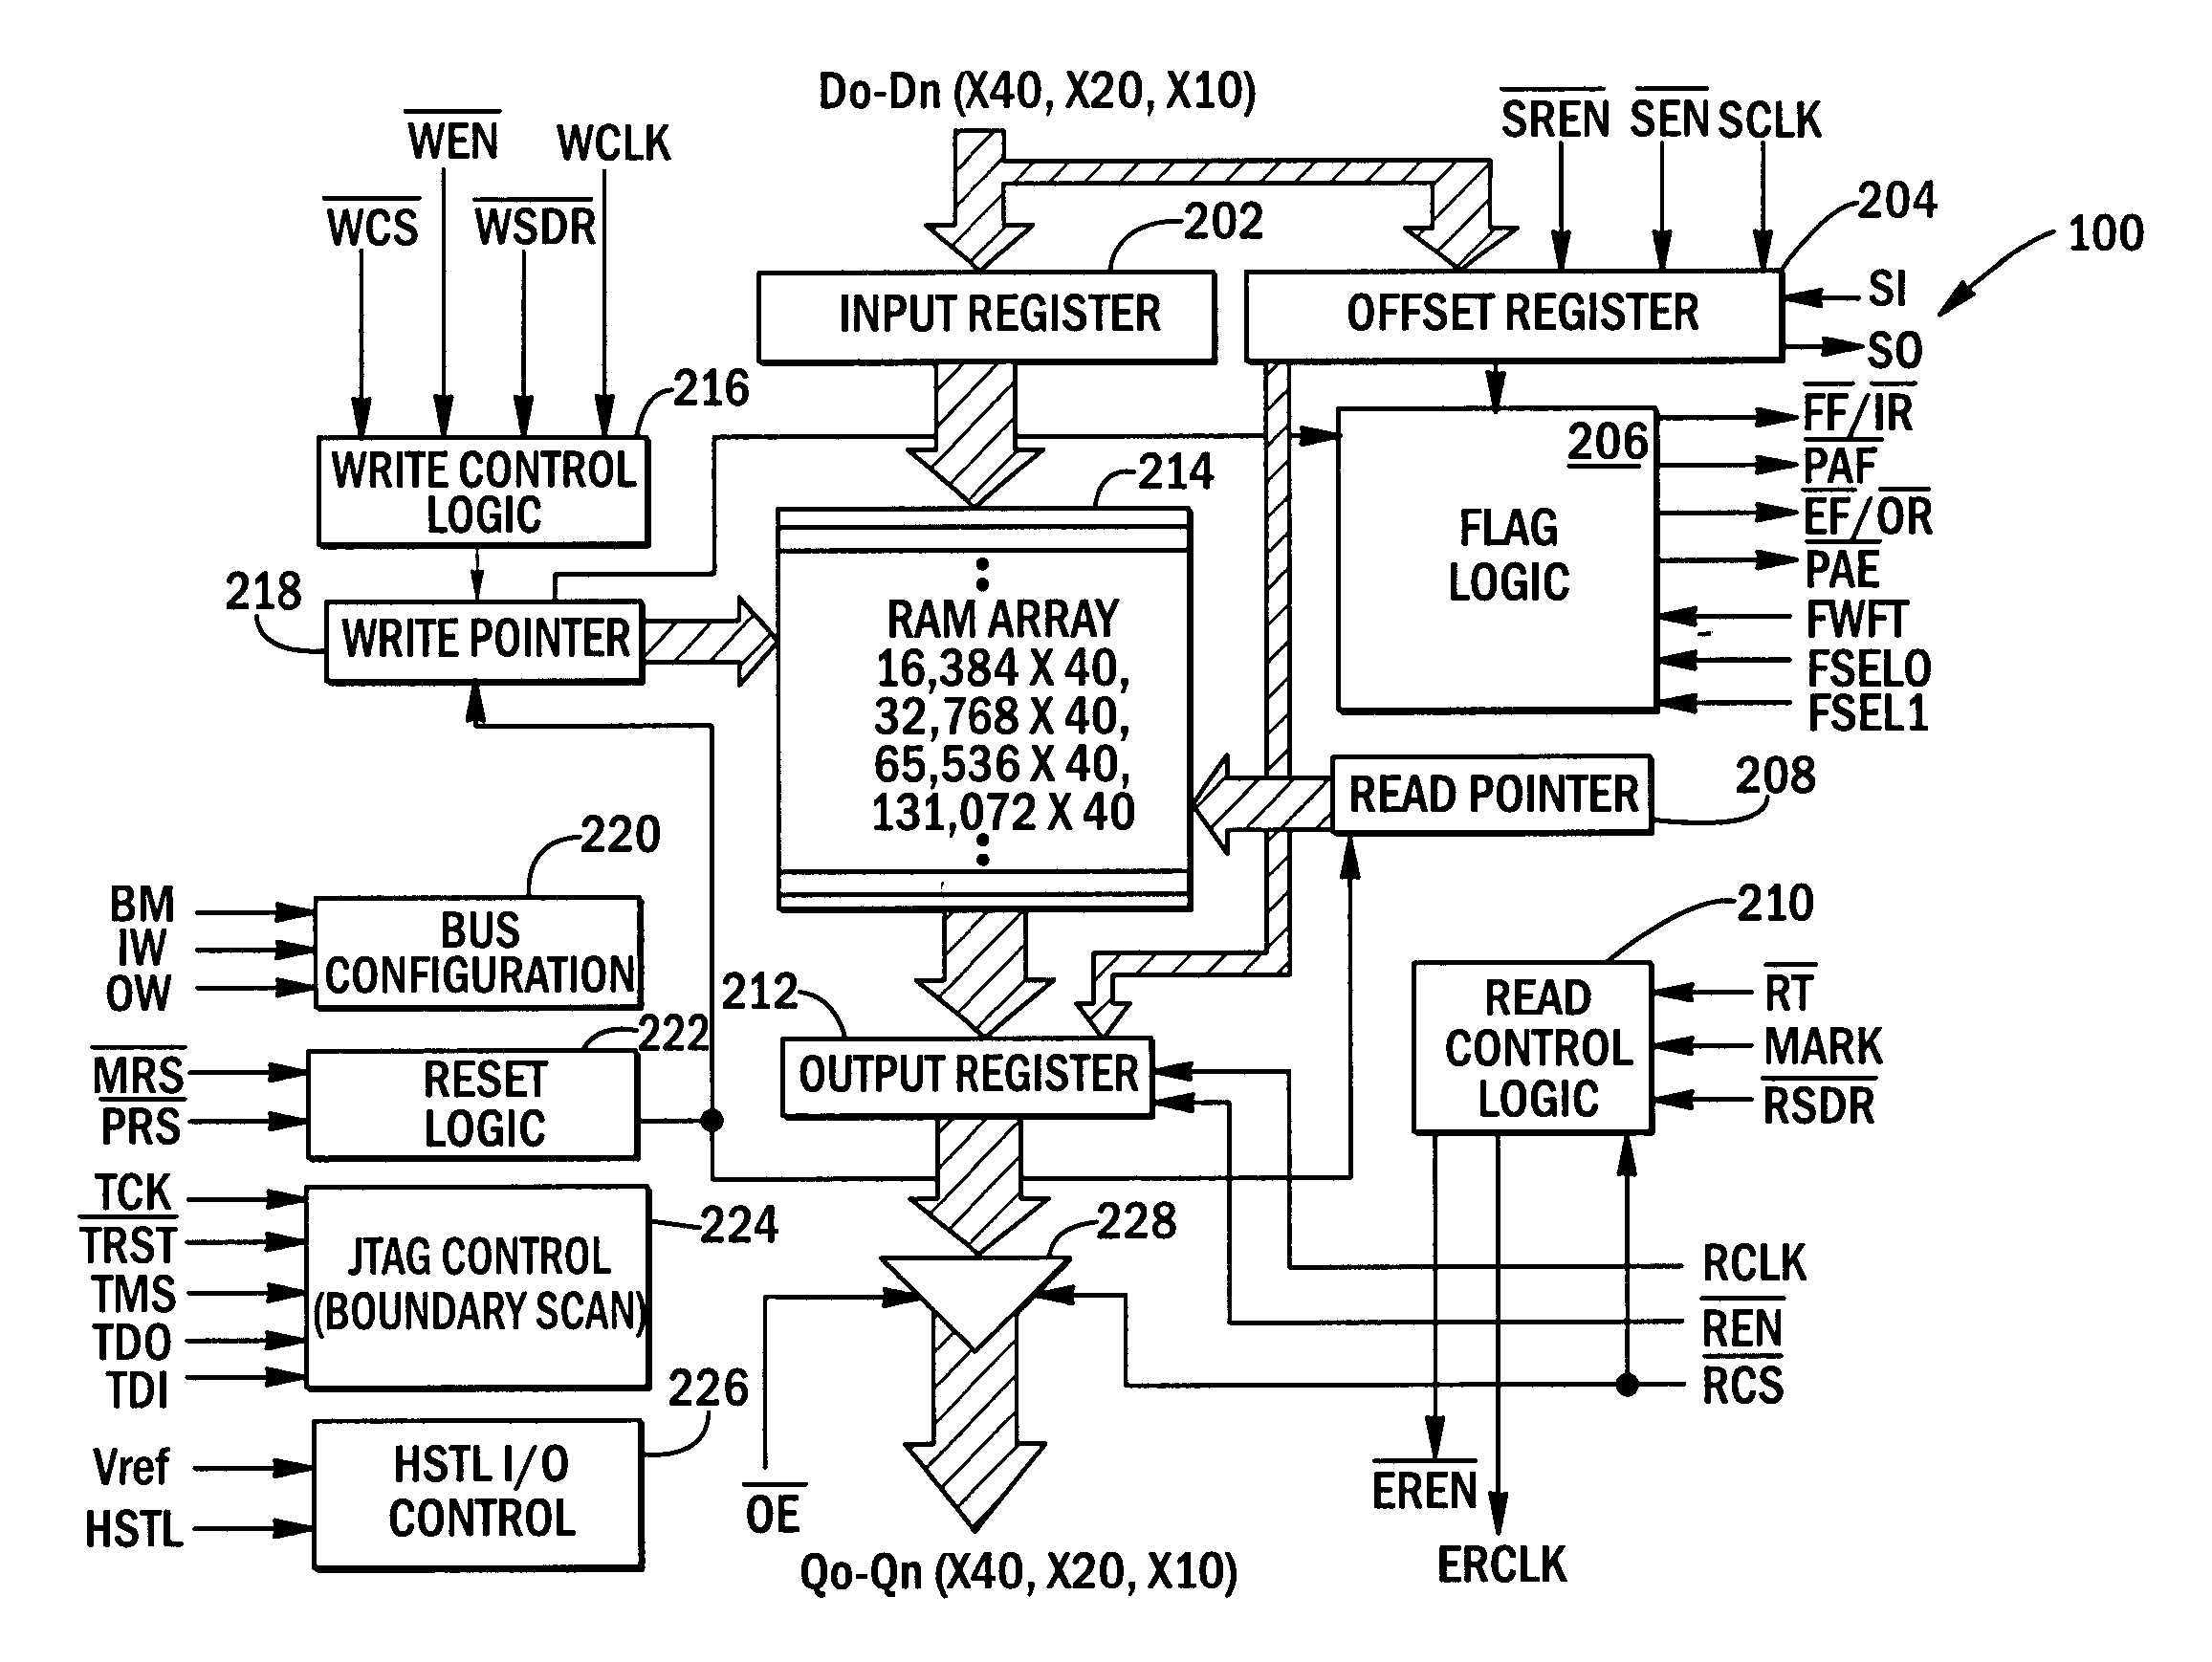 FIFO memory devices having write and read control circuits that support x4N, x2N and xN data widths during DDR and SDR modes of operation